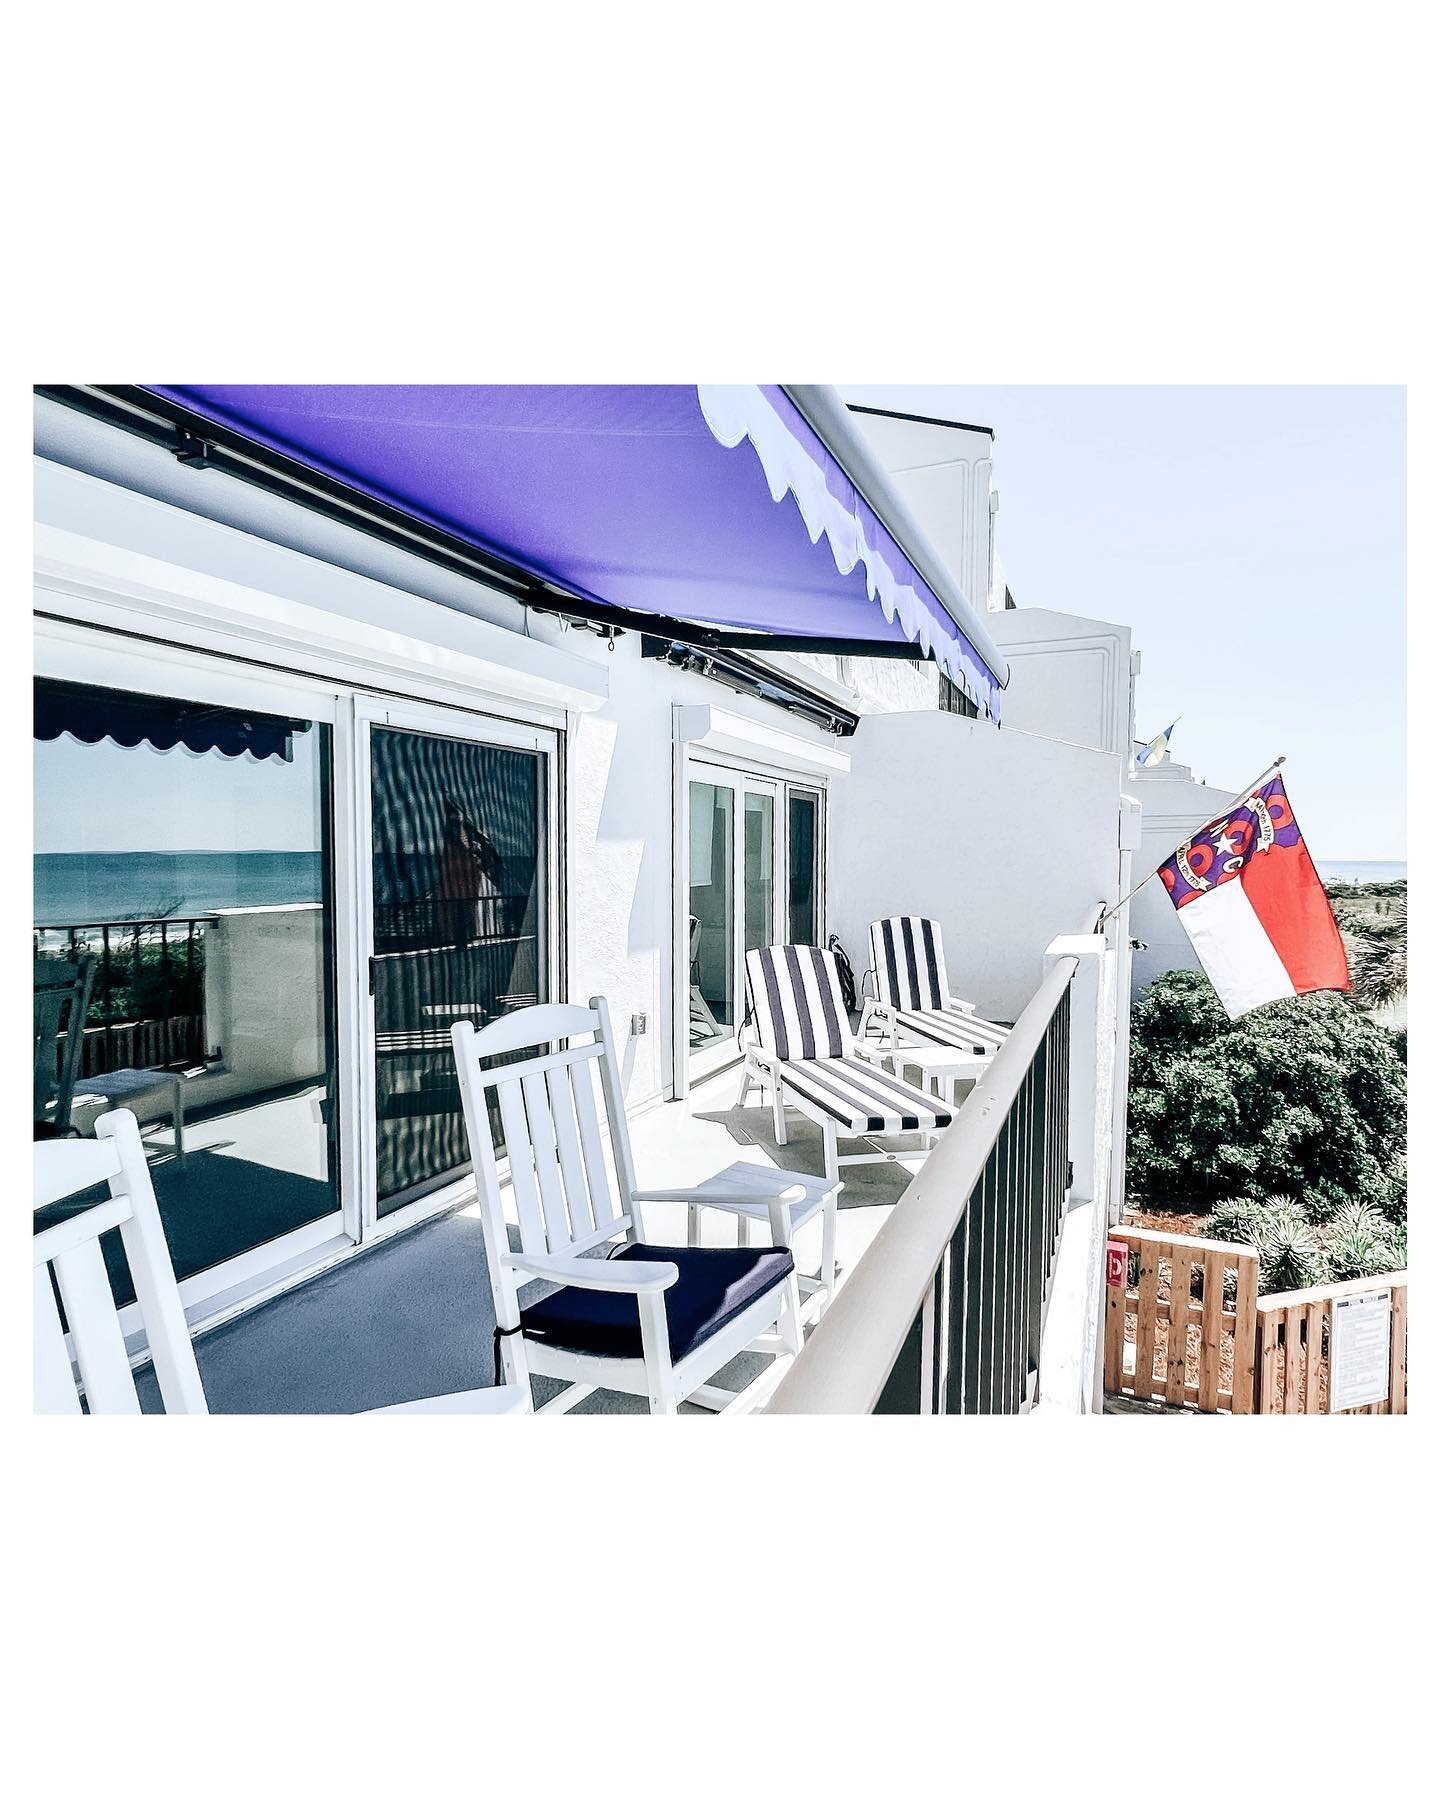 Where&rsquo;s your home away from home? 

Mine is in Pine Knoll Shores, this little condo aka #capeWOOKout.  It only takes 2.5 hours and is the perfect weekend getaway. 

If you&rsquo;re considering a second home, or home away from home at the North 